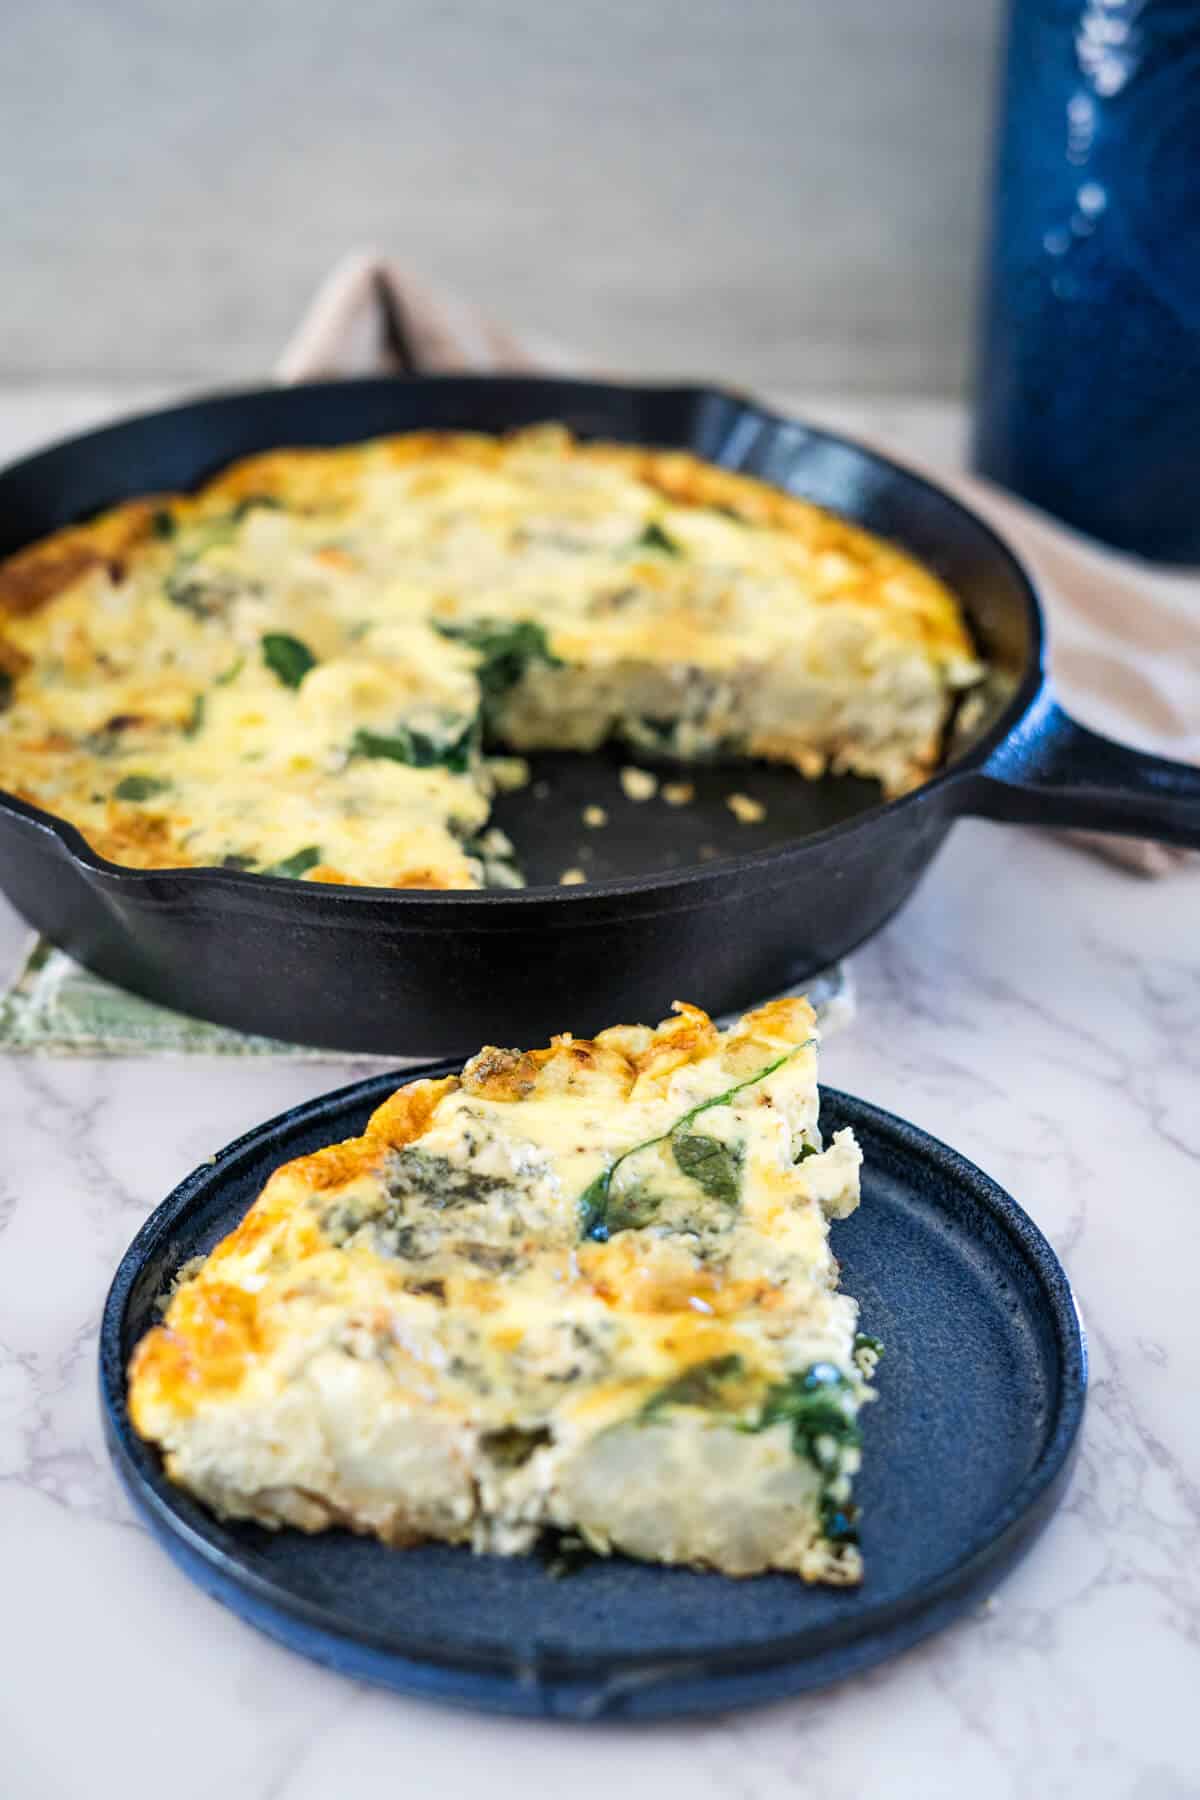 A frittata with spinach and cheese on a plate.